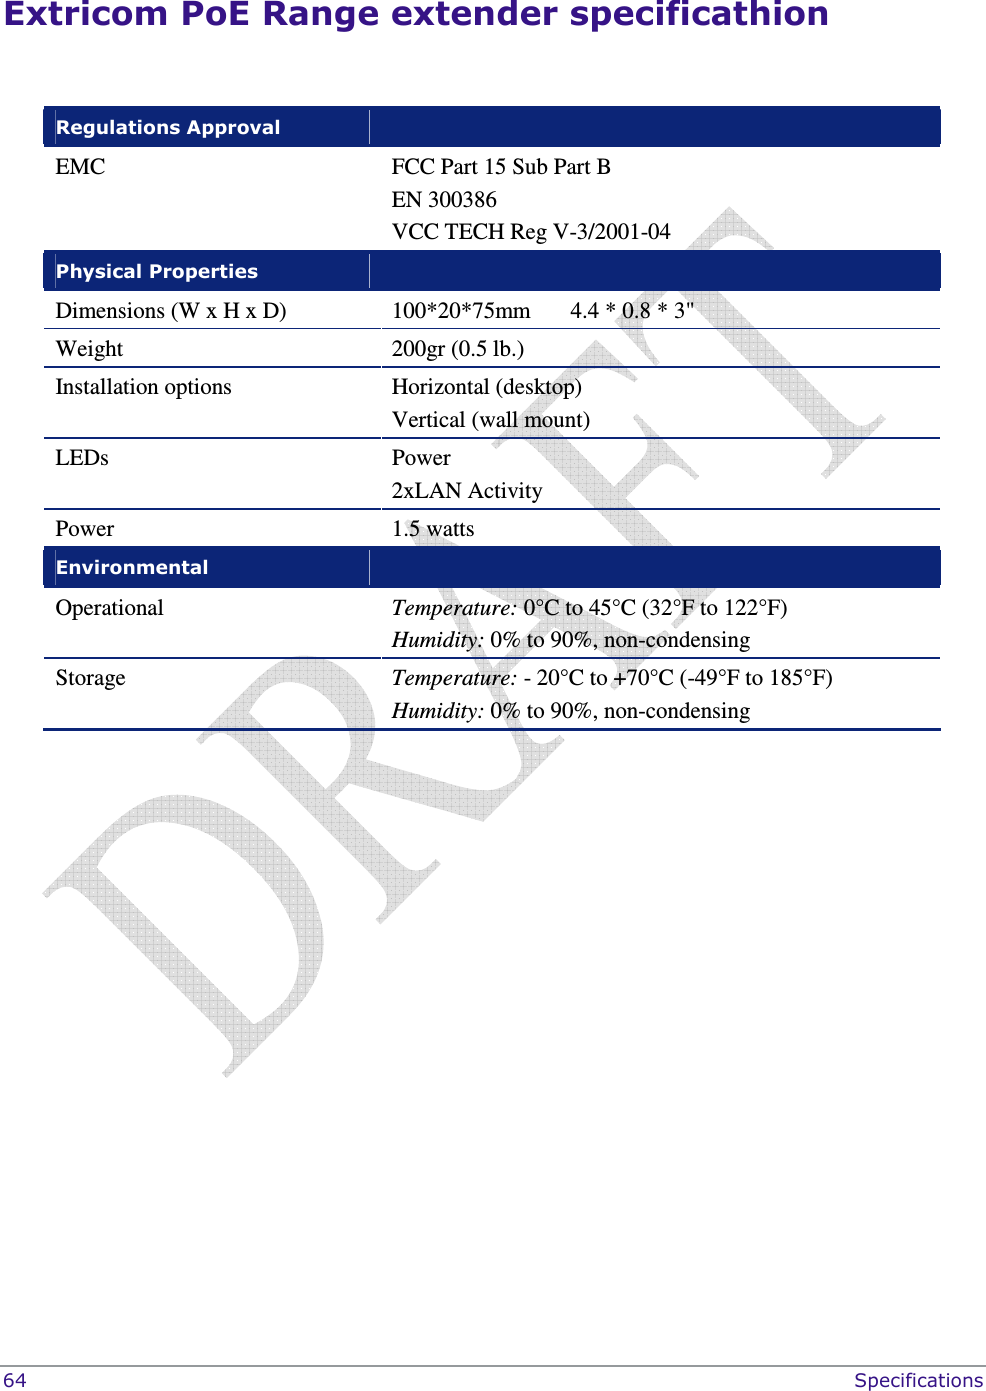  64    Specifications Extricom PoE Range extender specificathion  Regulations Approval   EMC FCC Part 15 Sub Part B EN 300386 VCC TECH Reg V-3/2001-04 Physical Properties   Dimensions (W x H x D)  100*20*75mm       4.4 * 0.8 * 3&quot; Weight   200gr (0.5 lb.) Installation options  Horizontal (desktop) Vertical (wall mount) LEDs  Power   2xLAN Activity Power  1.5 watts  Environmental   Operational   Temperature: 0°C to 45°C (32°F to 122°F)  Humidity: 0% to 90%, non-condensing  Storage   Temperature: - 20°C to +70°C (-49°F to 185°F) Humidity: 0% to 90%, non-condensing   